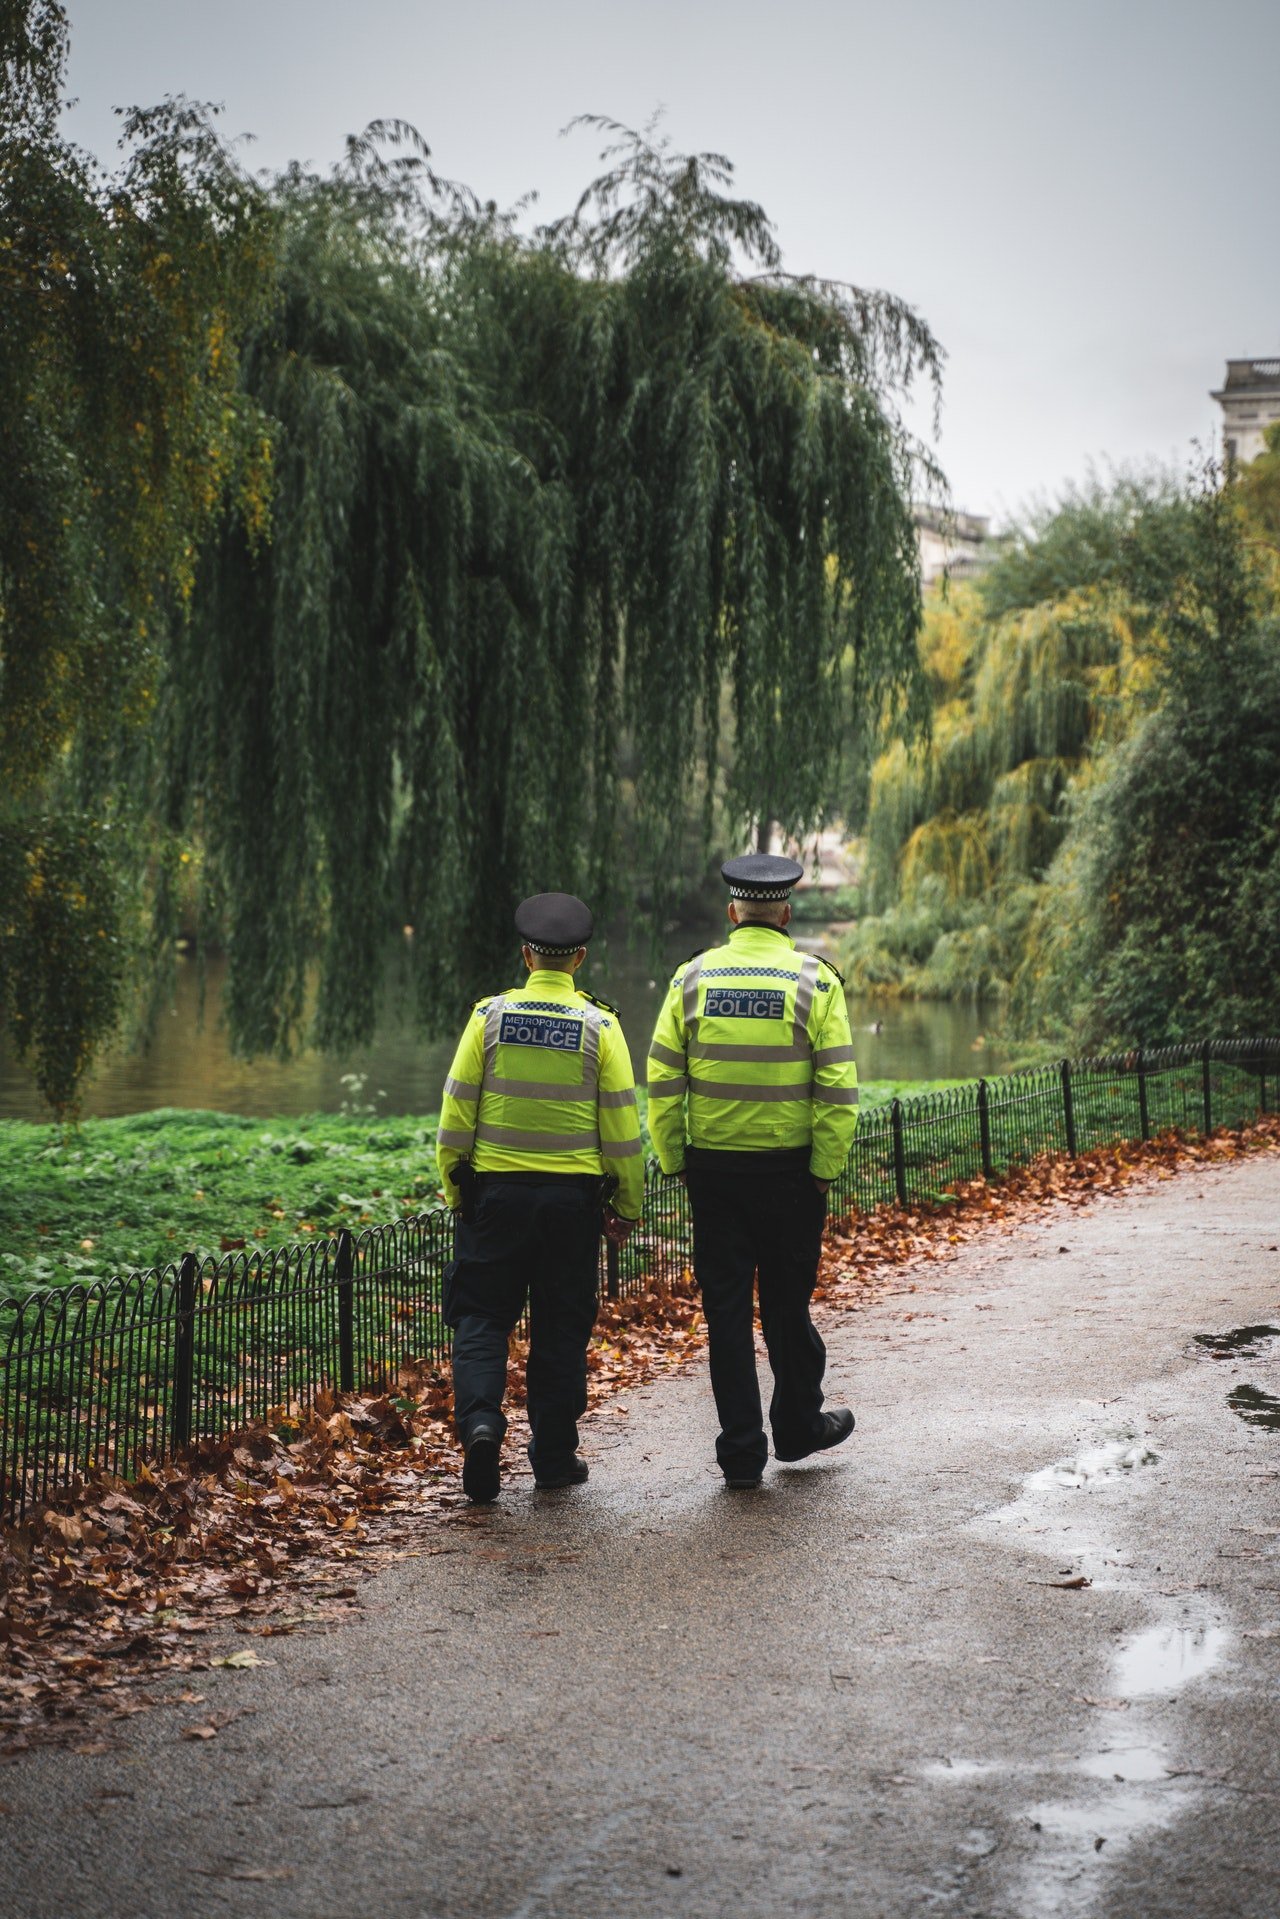 Two police officers walking down the road | Photo: Pexels